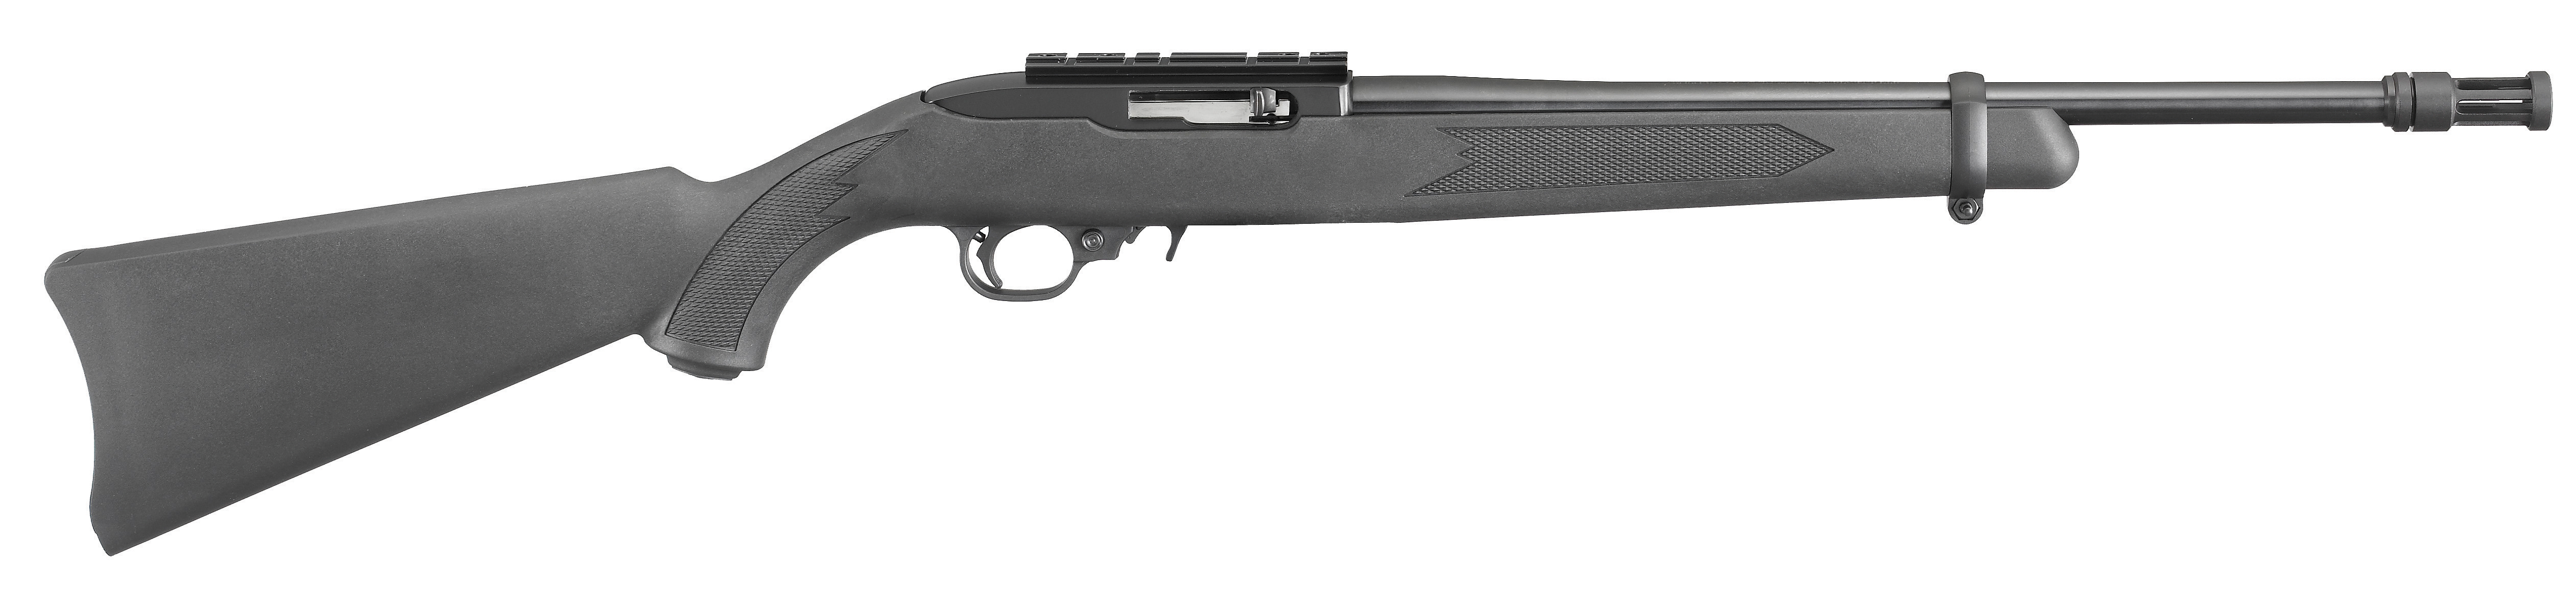 Weapons Ruger 10 22 Rifle 5044x1182